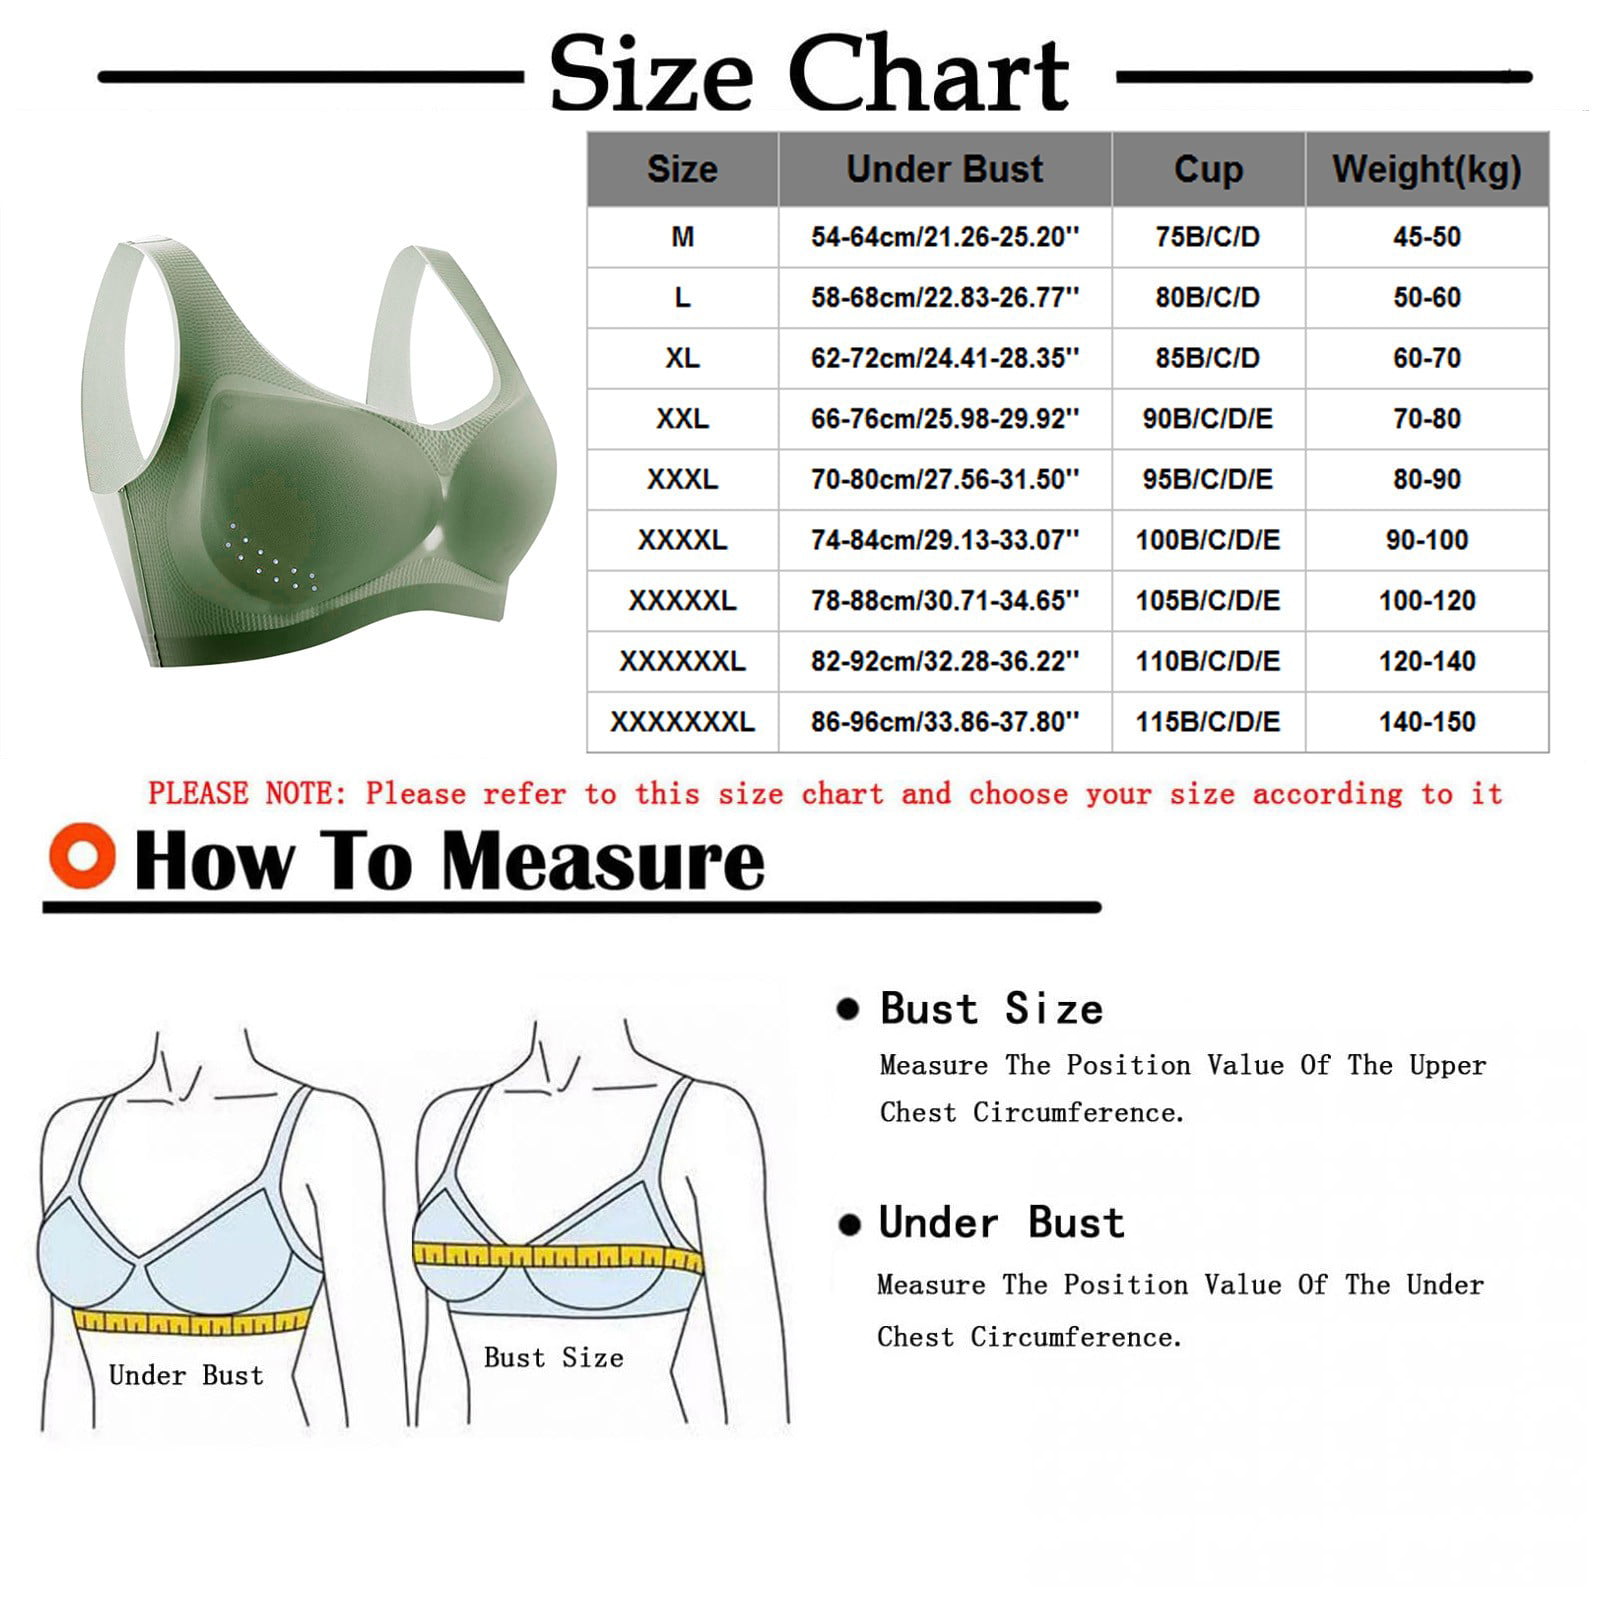 TQWQT Padded T Shirt Bras for Women Plunge Push up Bra Plus Size Underwire  Bra Complexion 42A